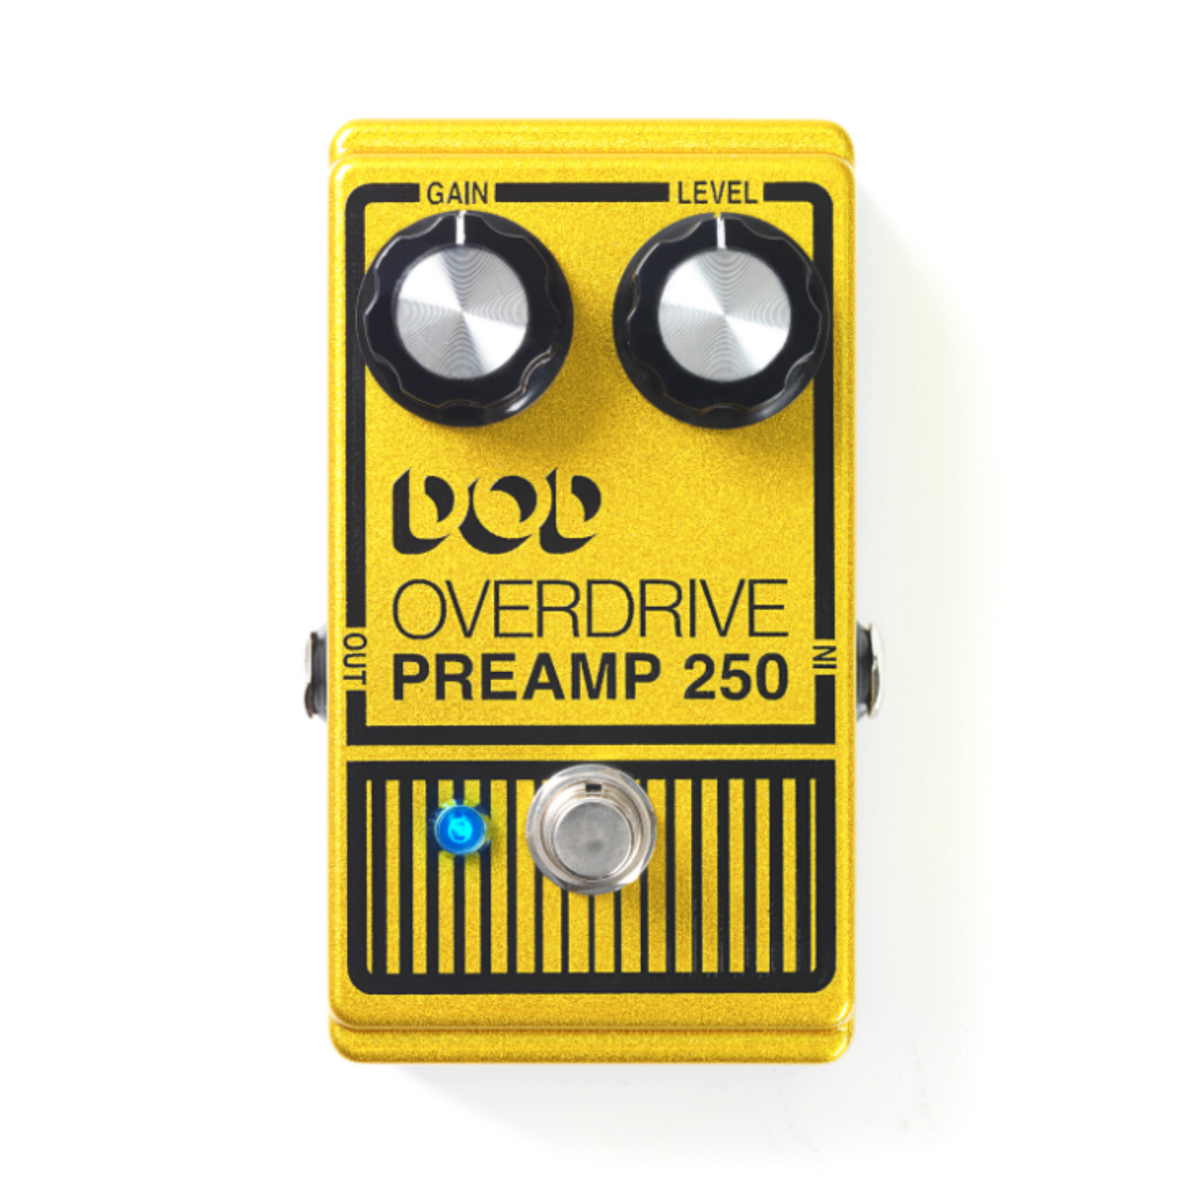 DOD Overdrive Preamp 250 Review